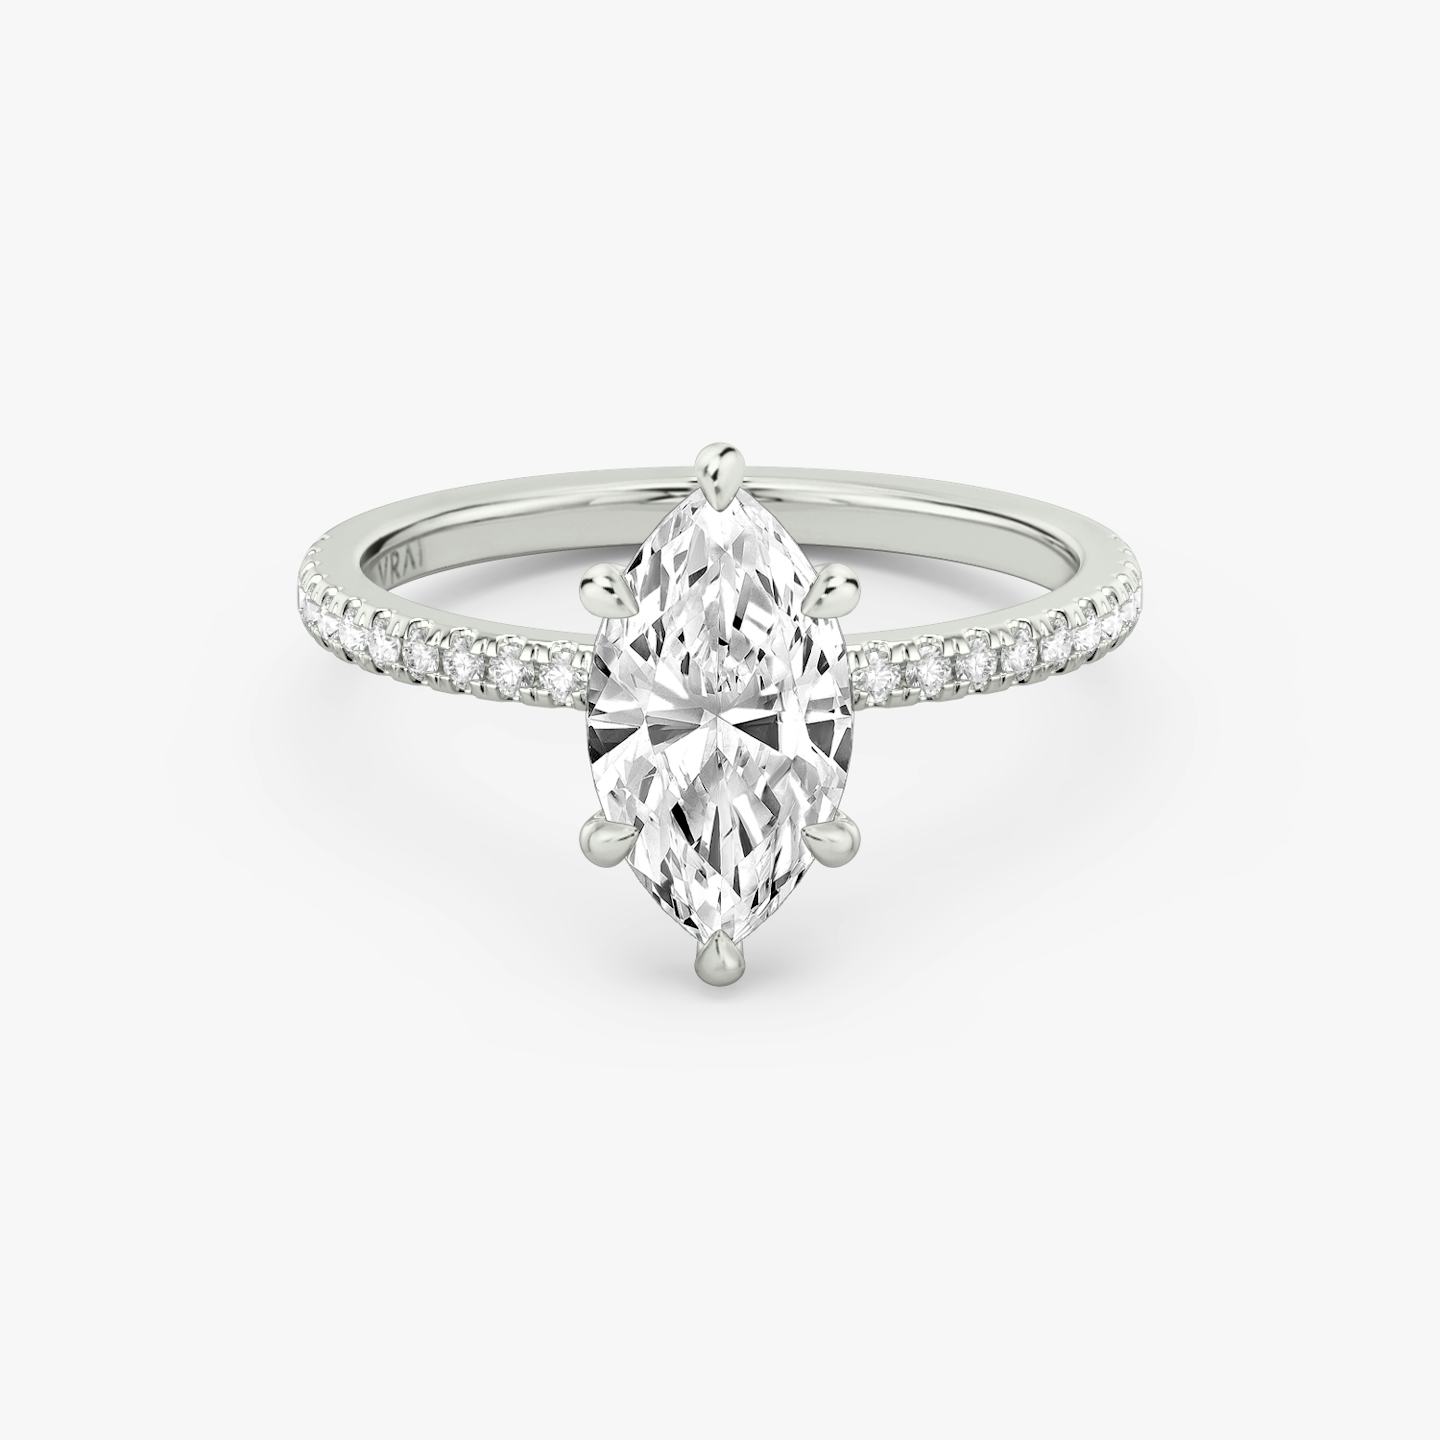 6-Prong Platinum Solitaire engagement ring with Marquise cut diamond